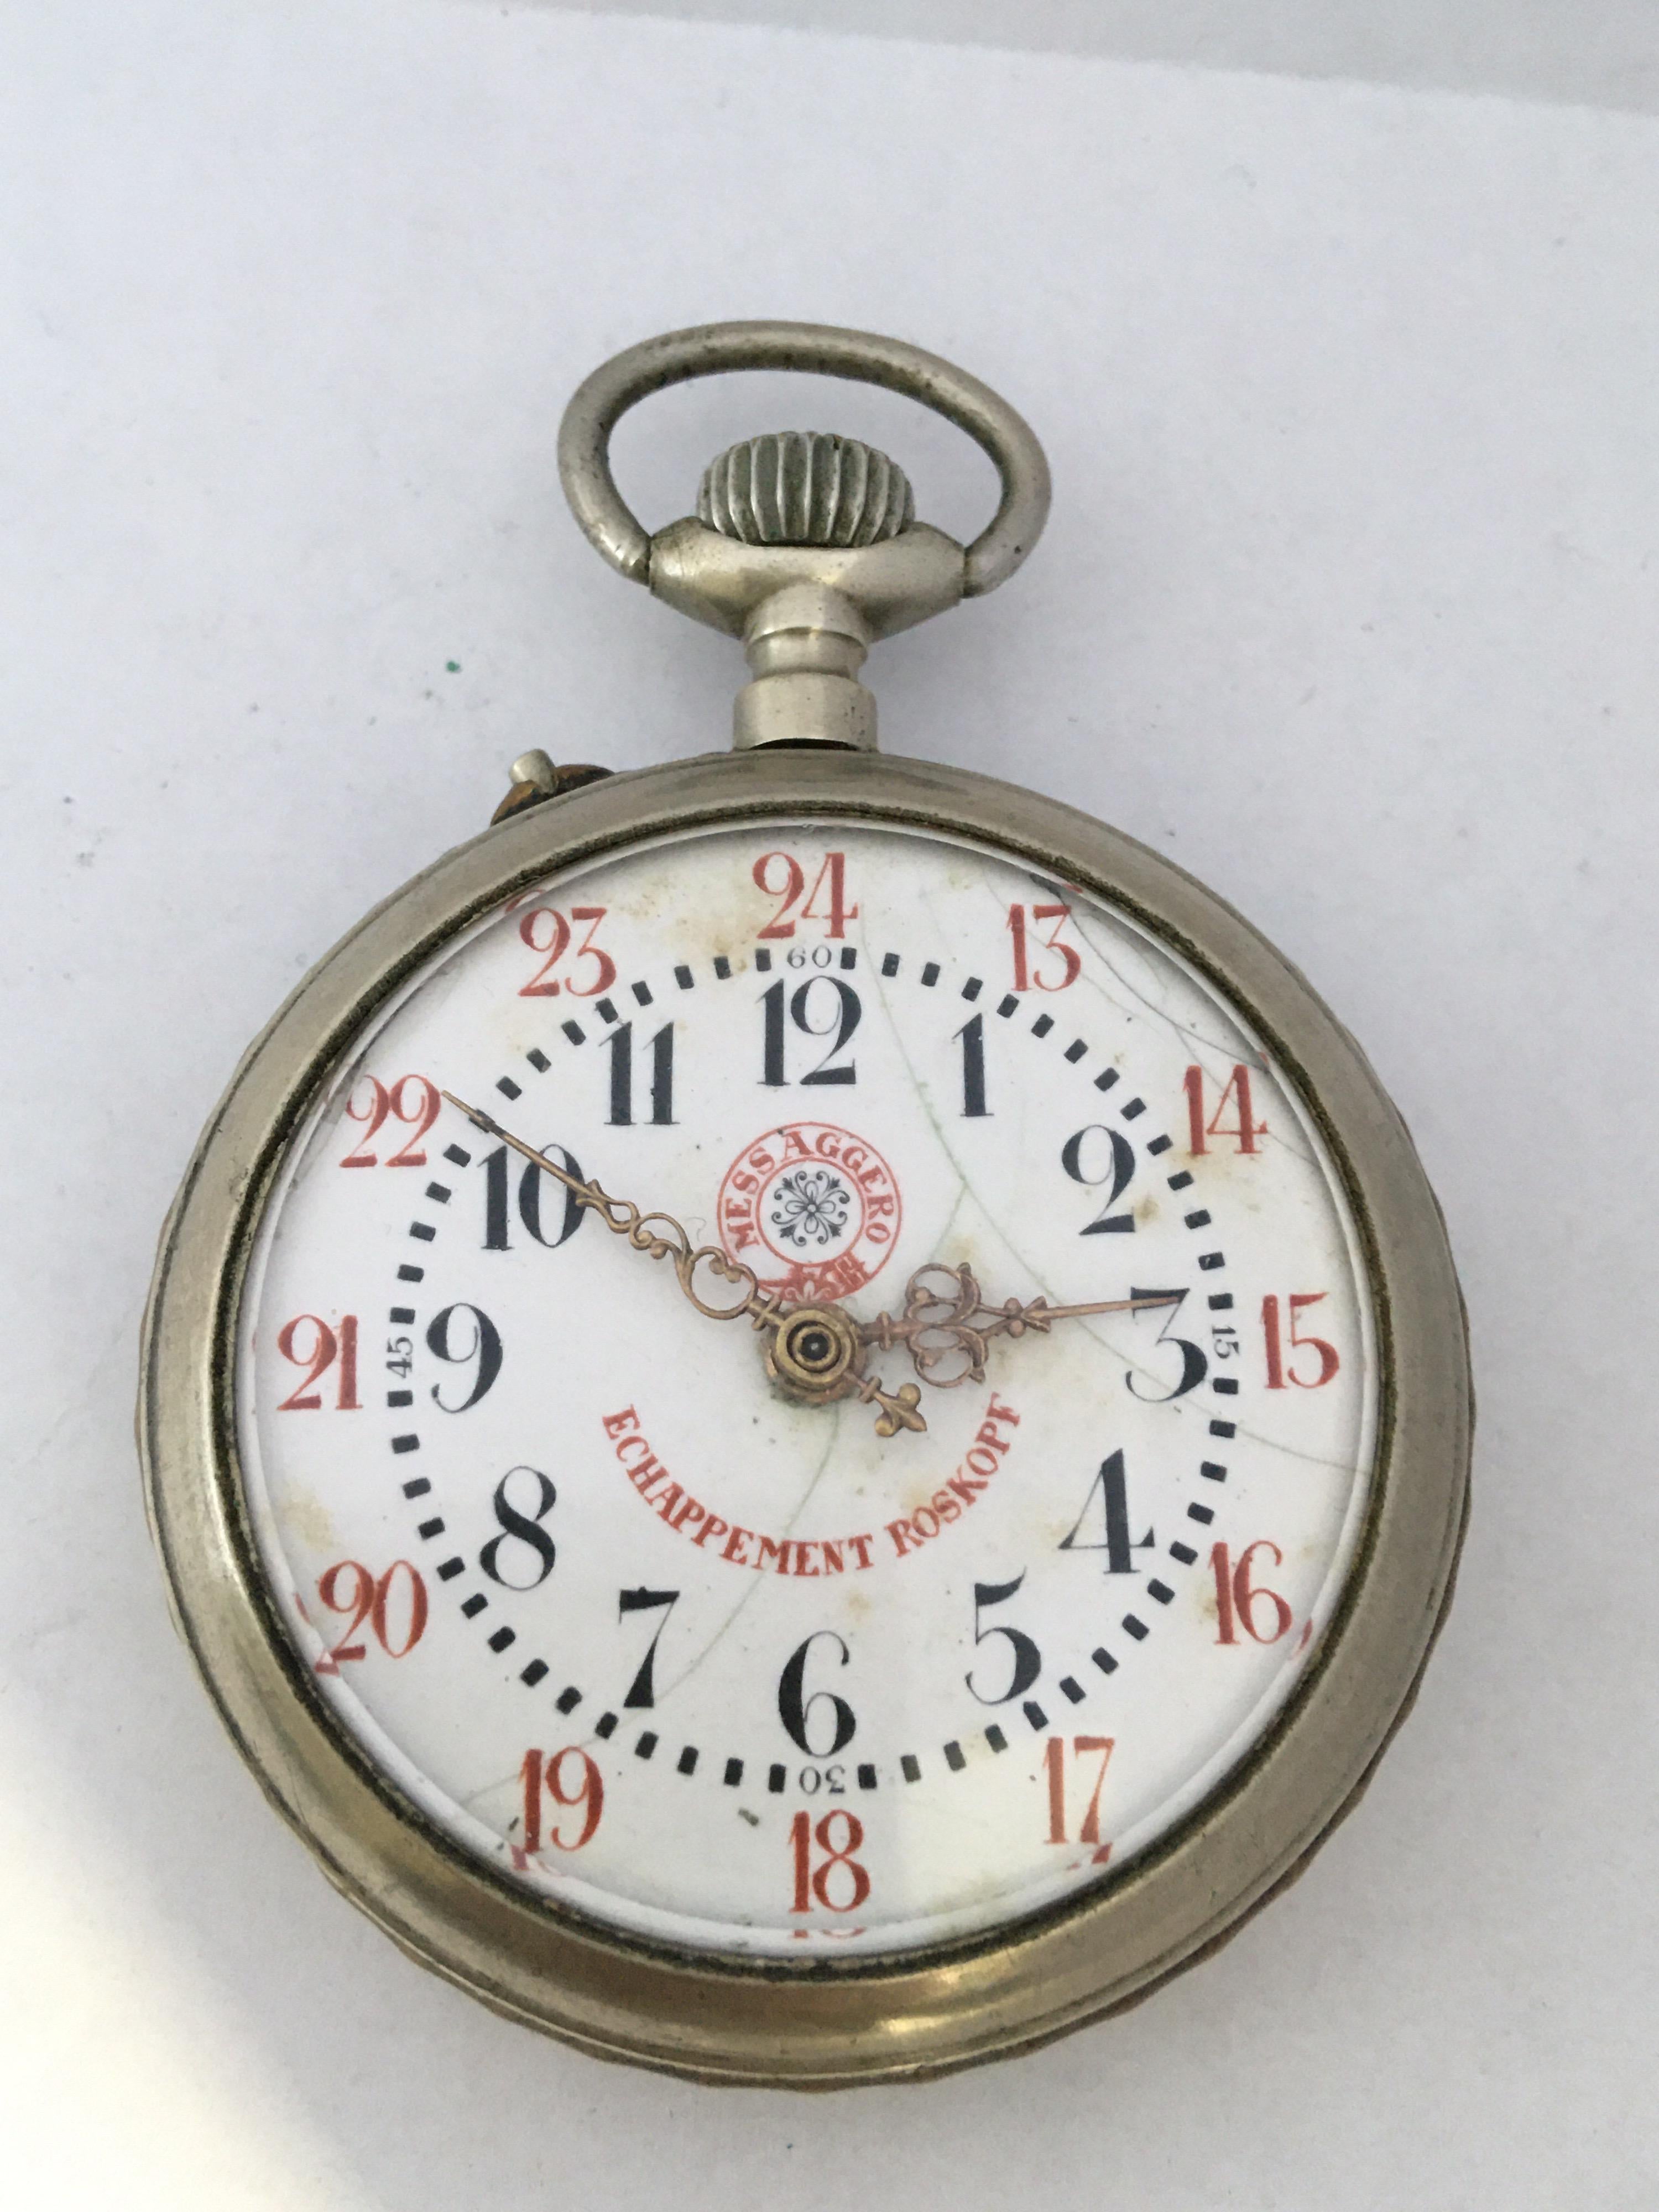 This beautiful 56mm diameter hand winding pin set pocket watch is working and it is ticking well. Visita signs of ageing and wear with some cracks on the while enamel dial. Some scratches and and tiny dents on the white metal watch case. Please